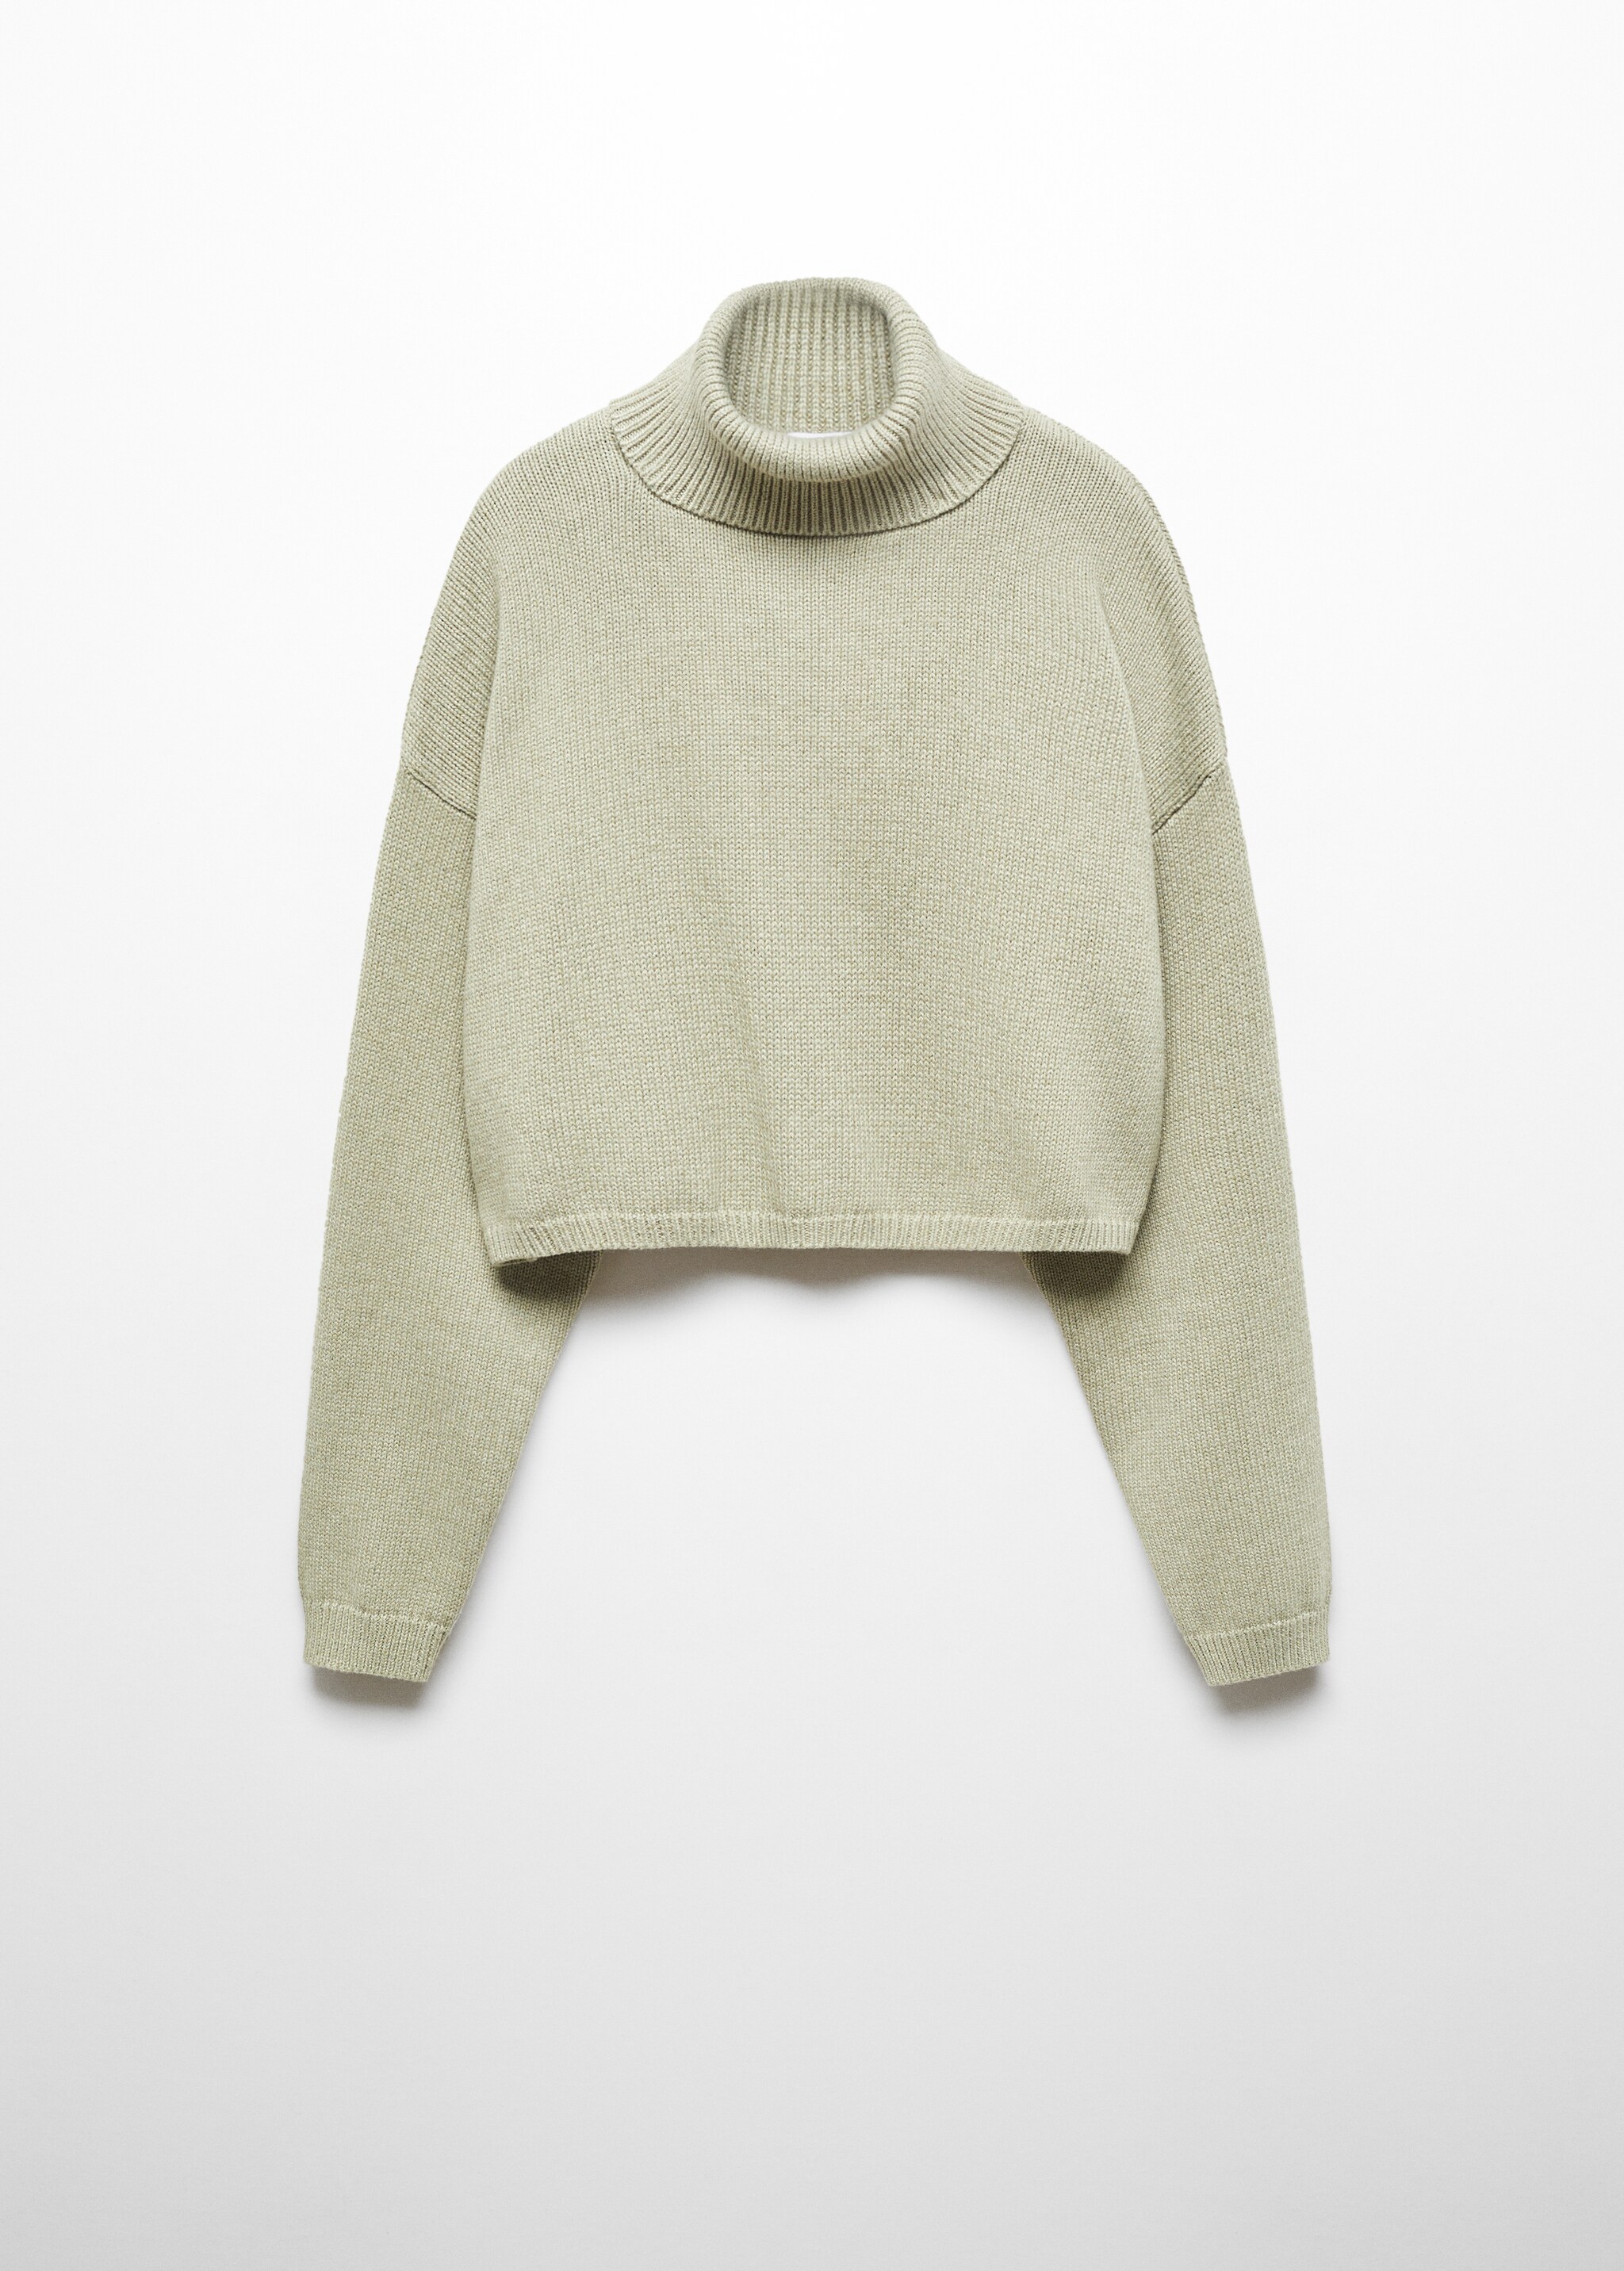 Turtleneck knitted sweater - Article without model